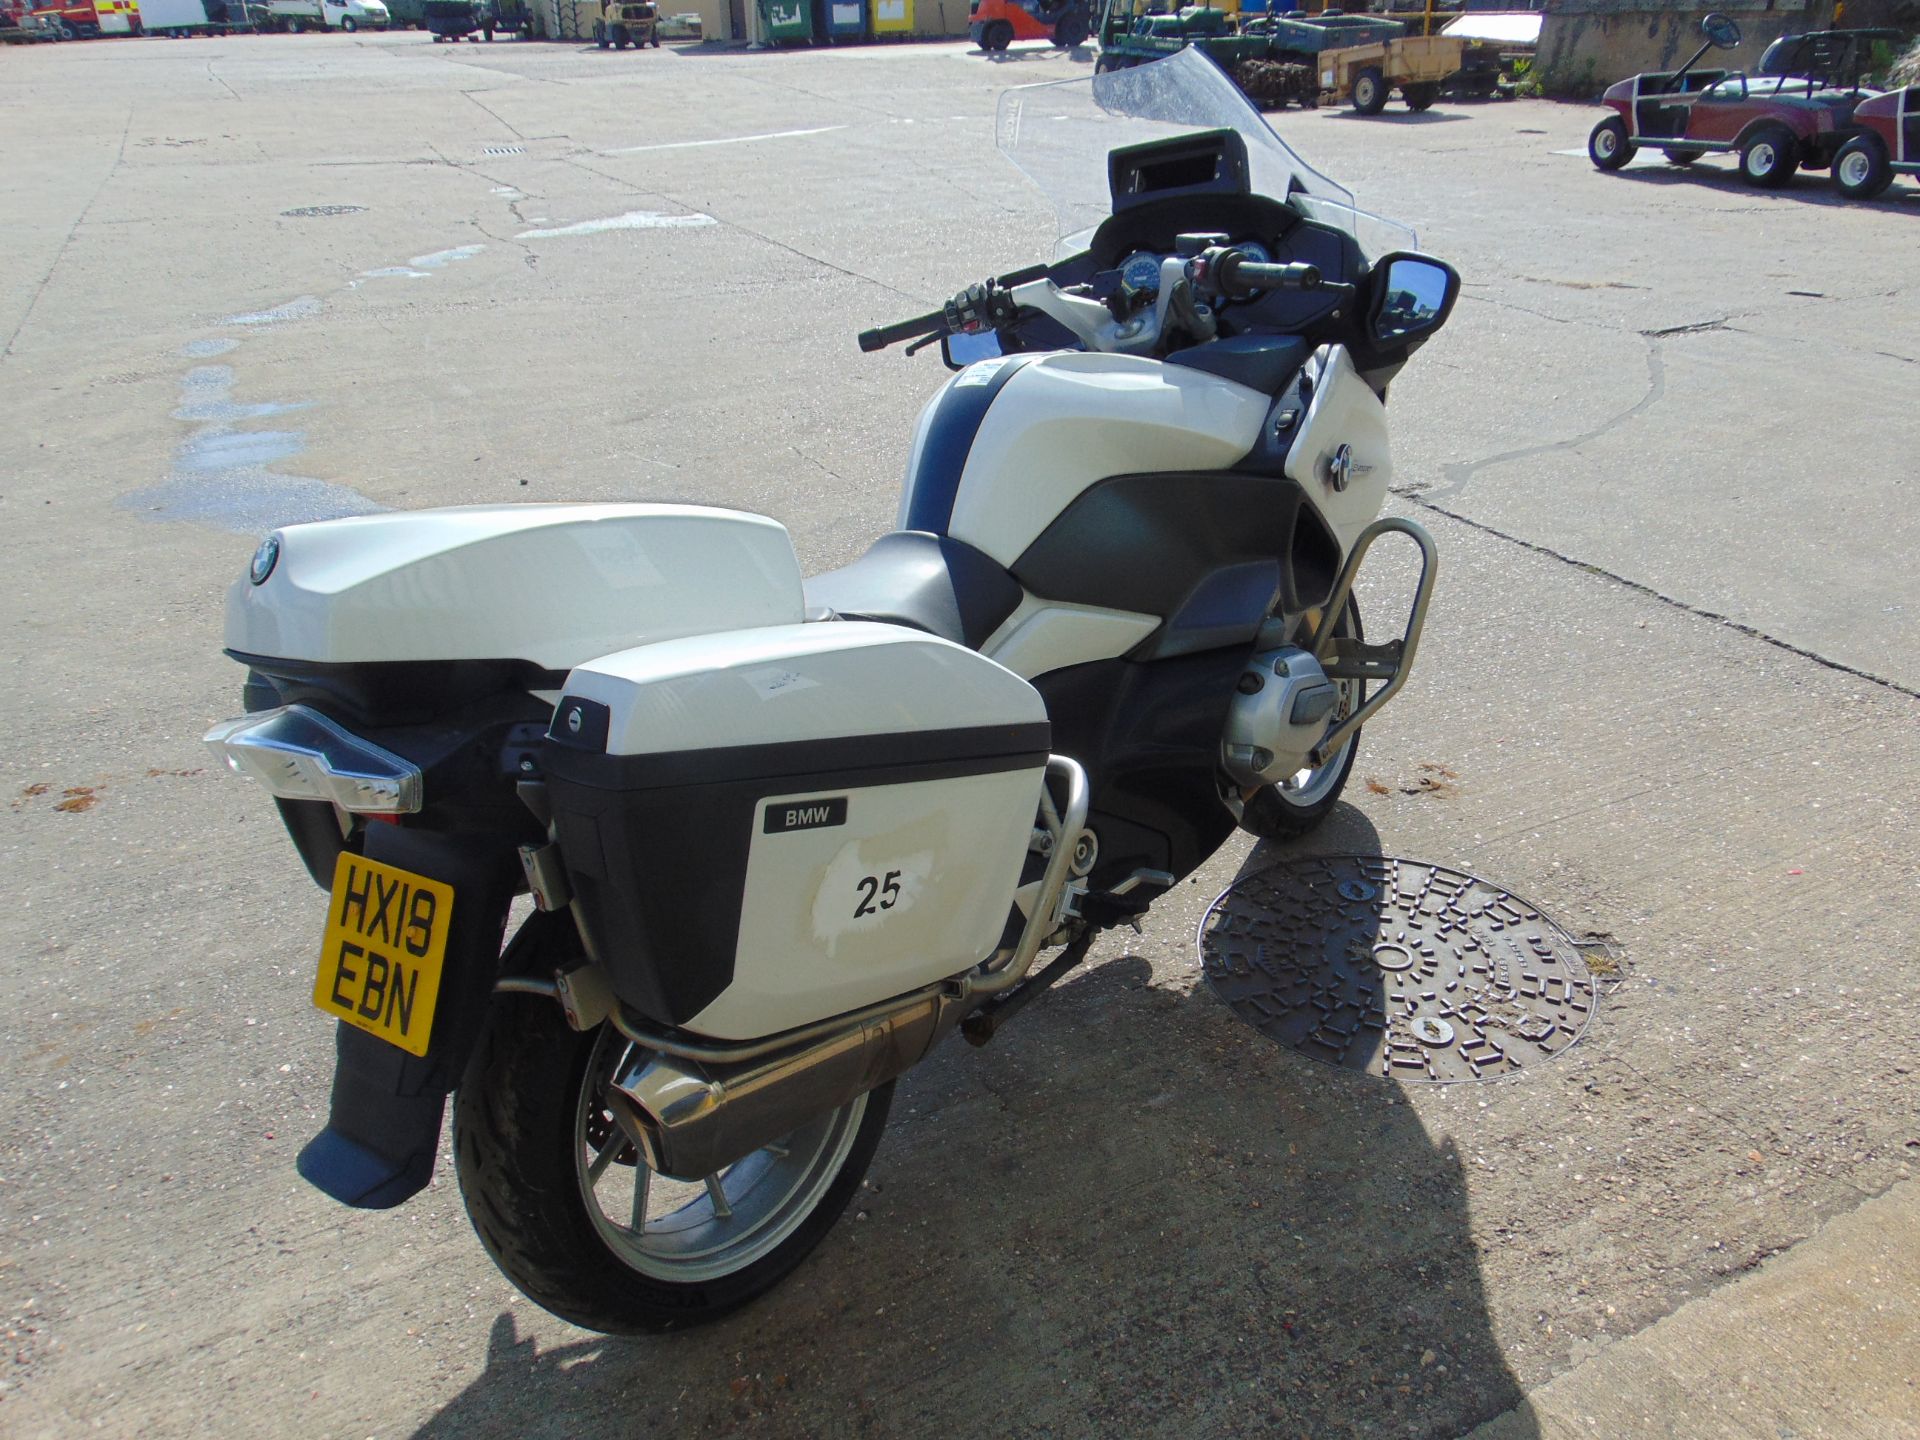 2018 BMW R1200RT Motorbike 50,000 miles from UK Police - Image 6 of 38